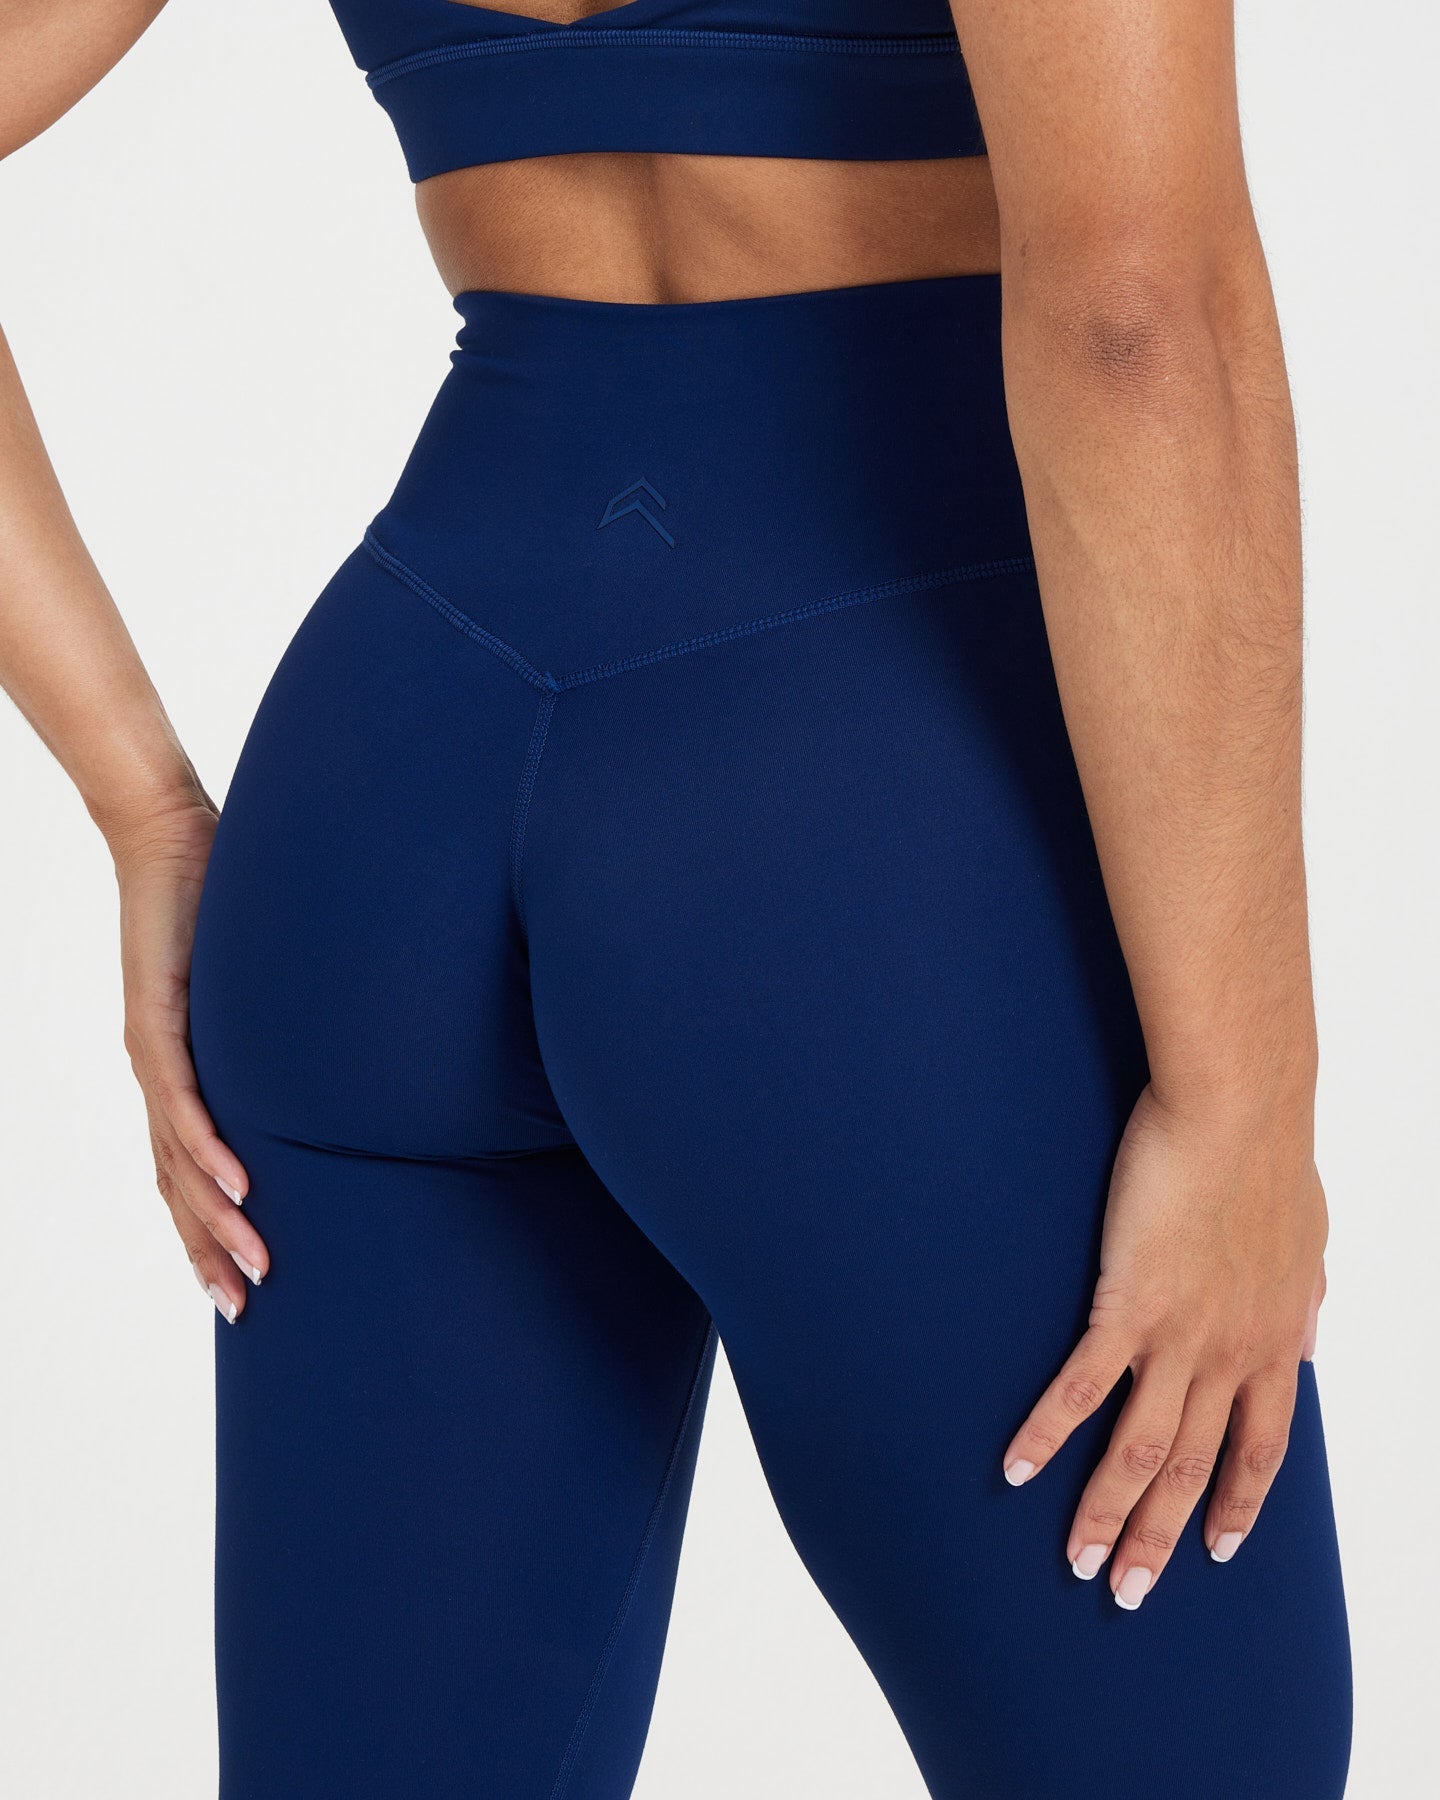 Women's Leggings with ultimate Glute Separation